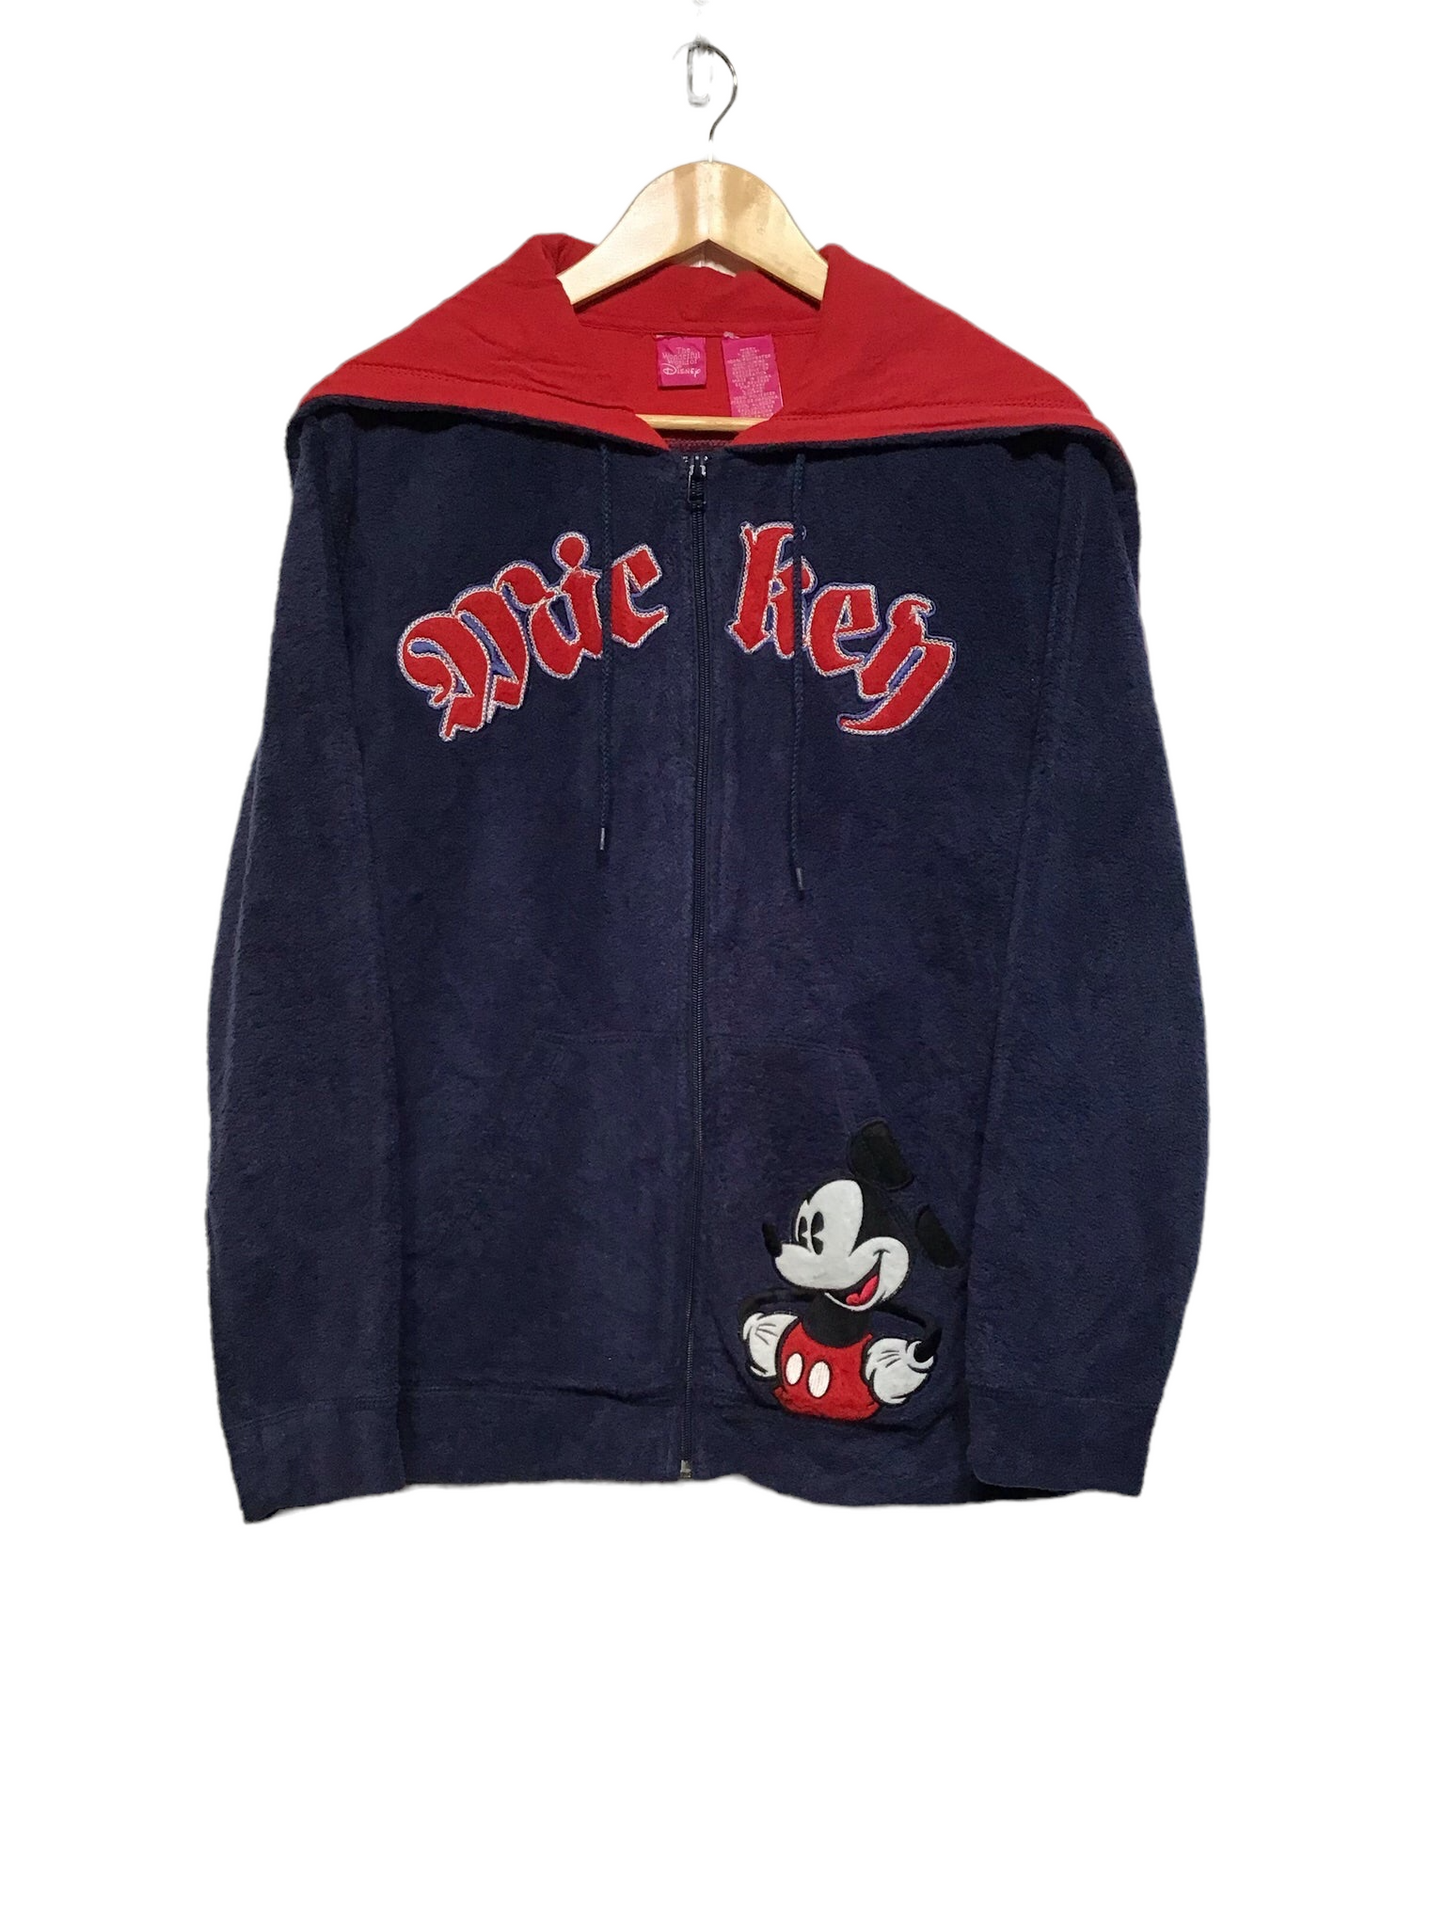 Micky Mouse Navy And Red Zip Up Fleece (Size L)